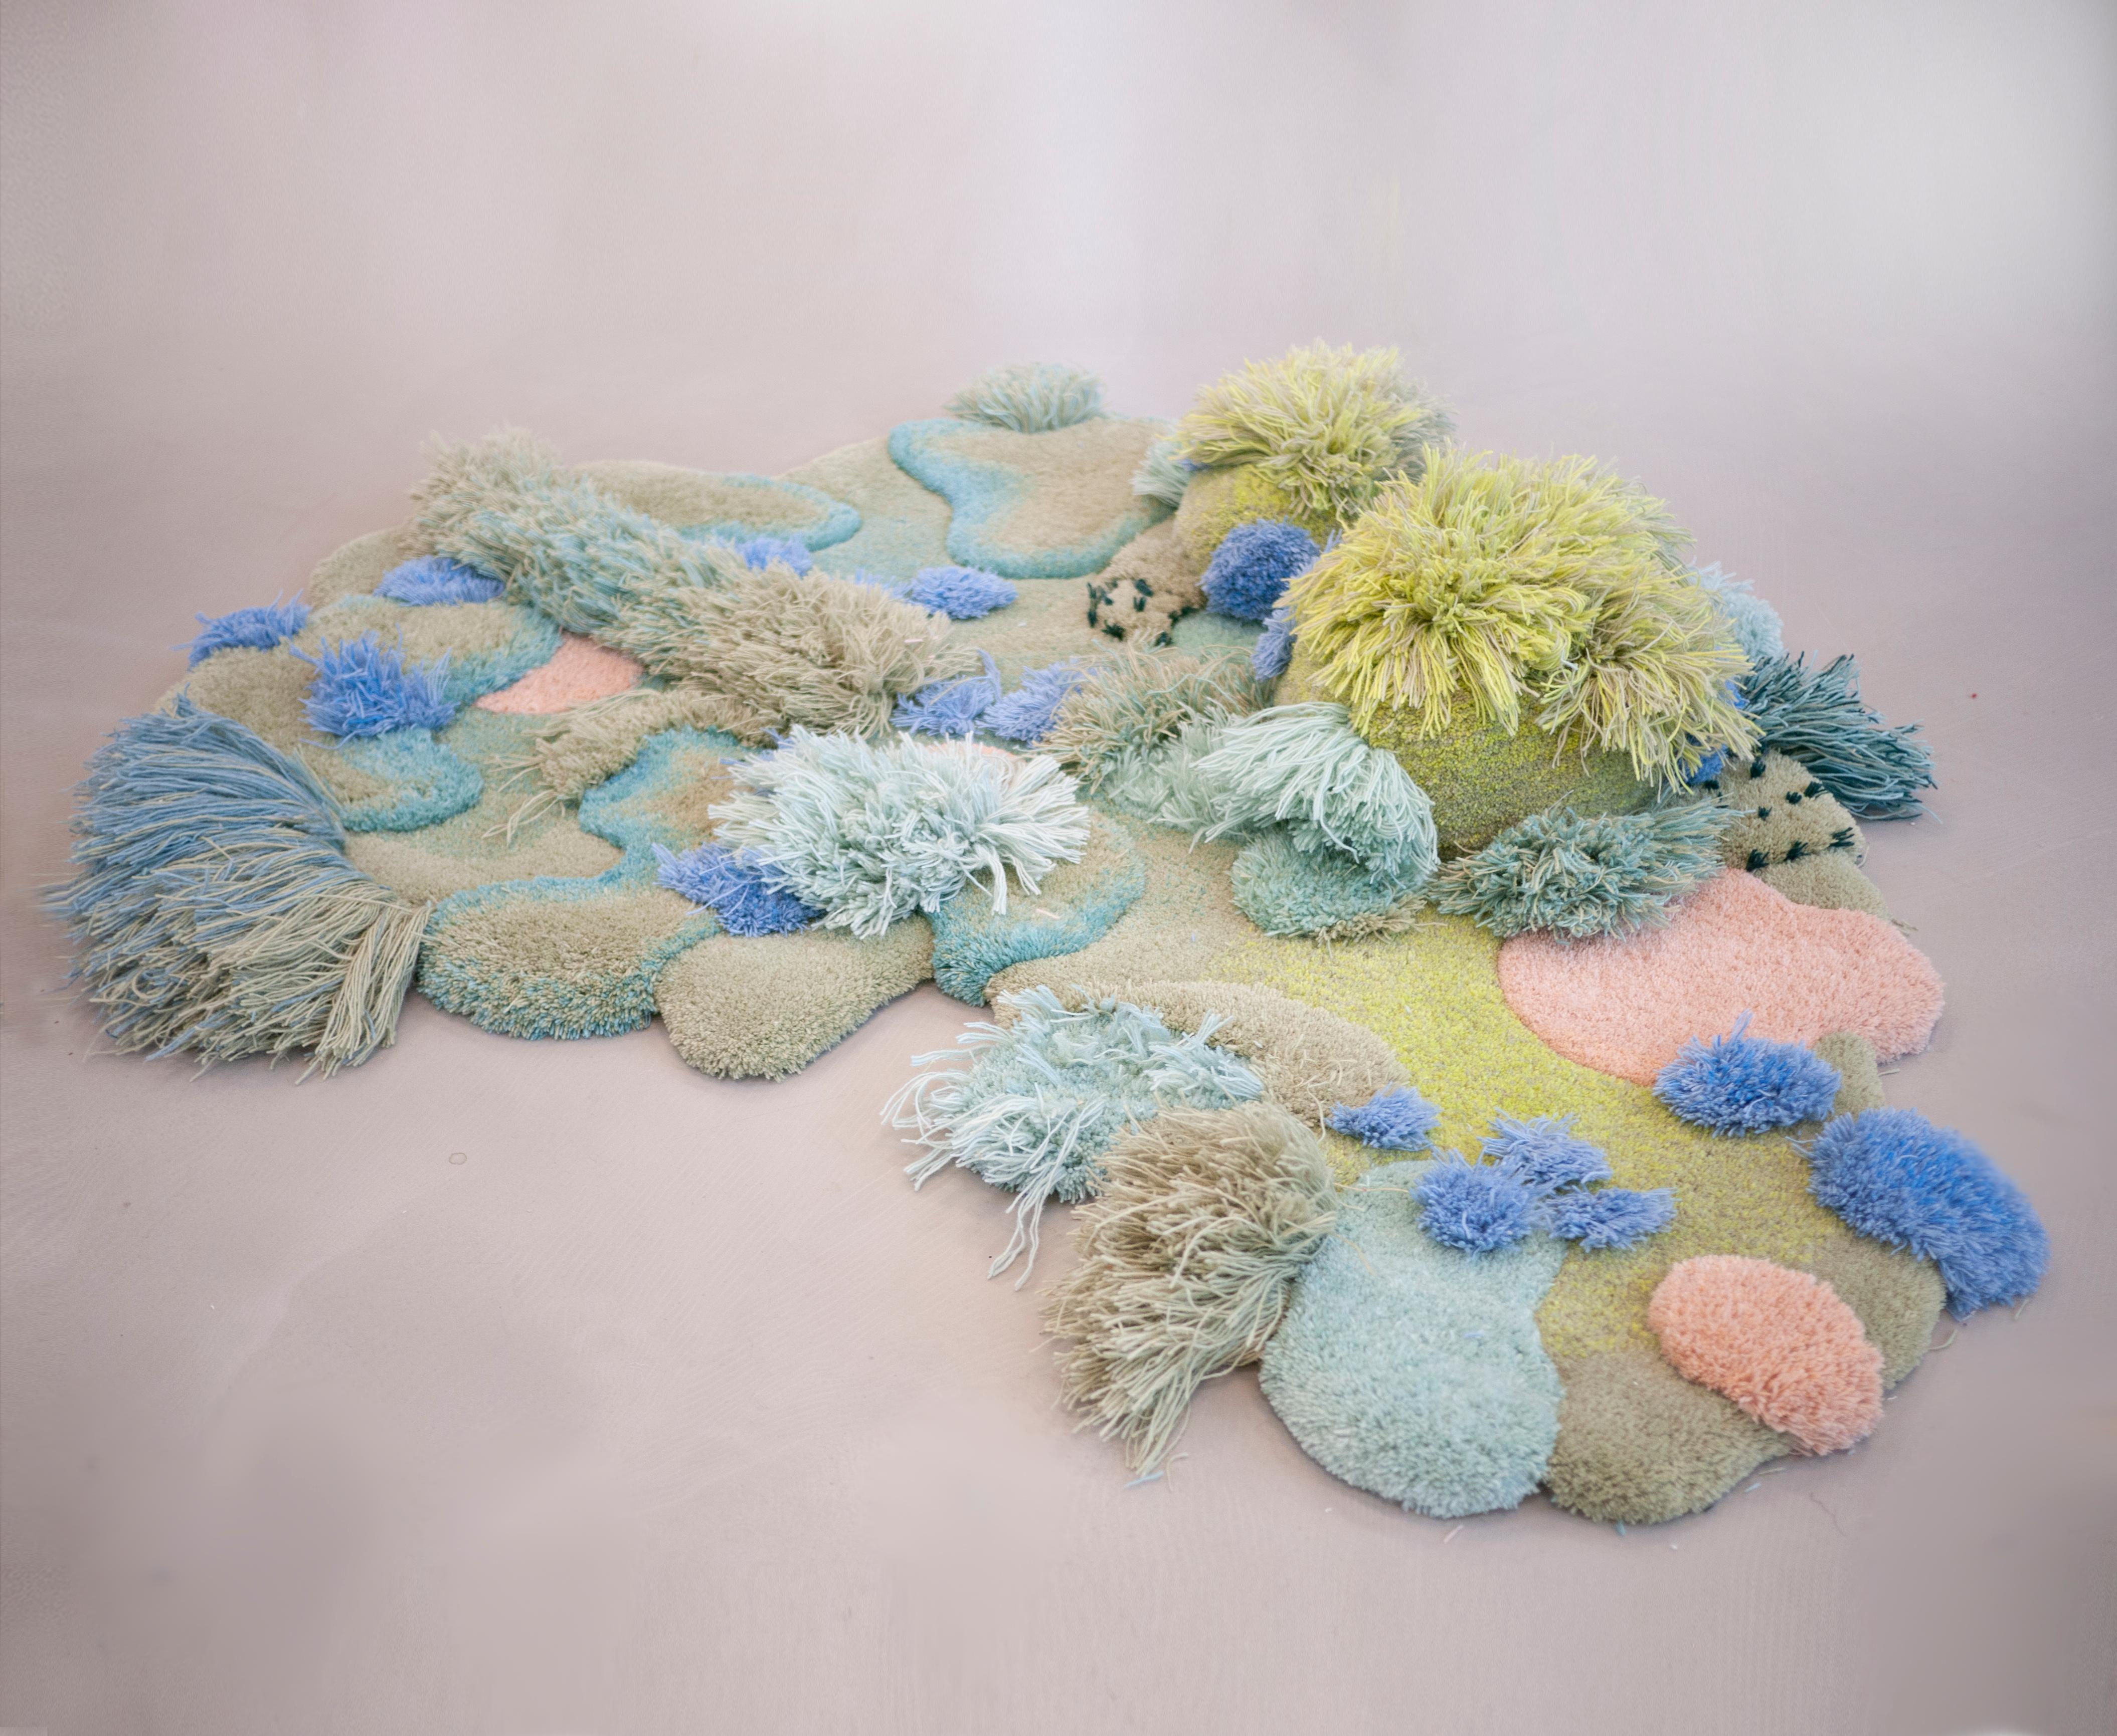 Forget me not garden , is a wool landscape for your floor. A lush spring garden with fresh grass and newly srung flowers. It features 2 pillow hilld incorporated in the rug, to rest your head or feet on.
A soft spot to bring nature and sunshine to